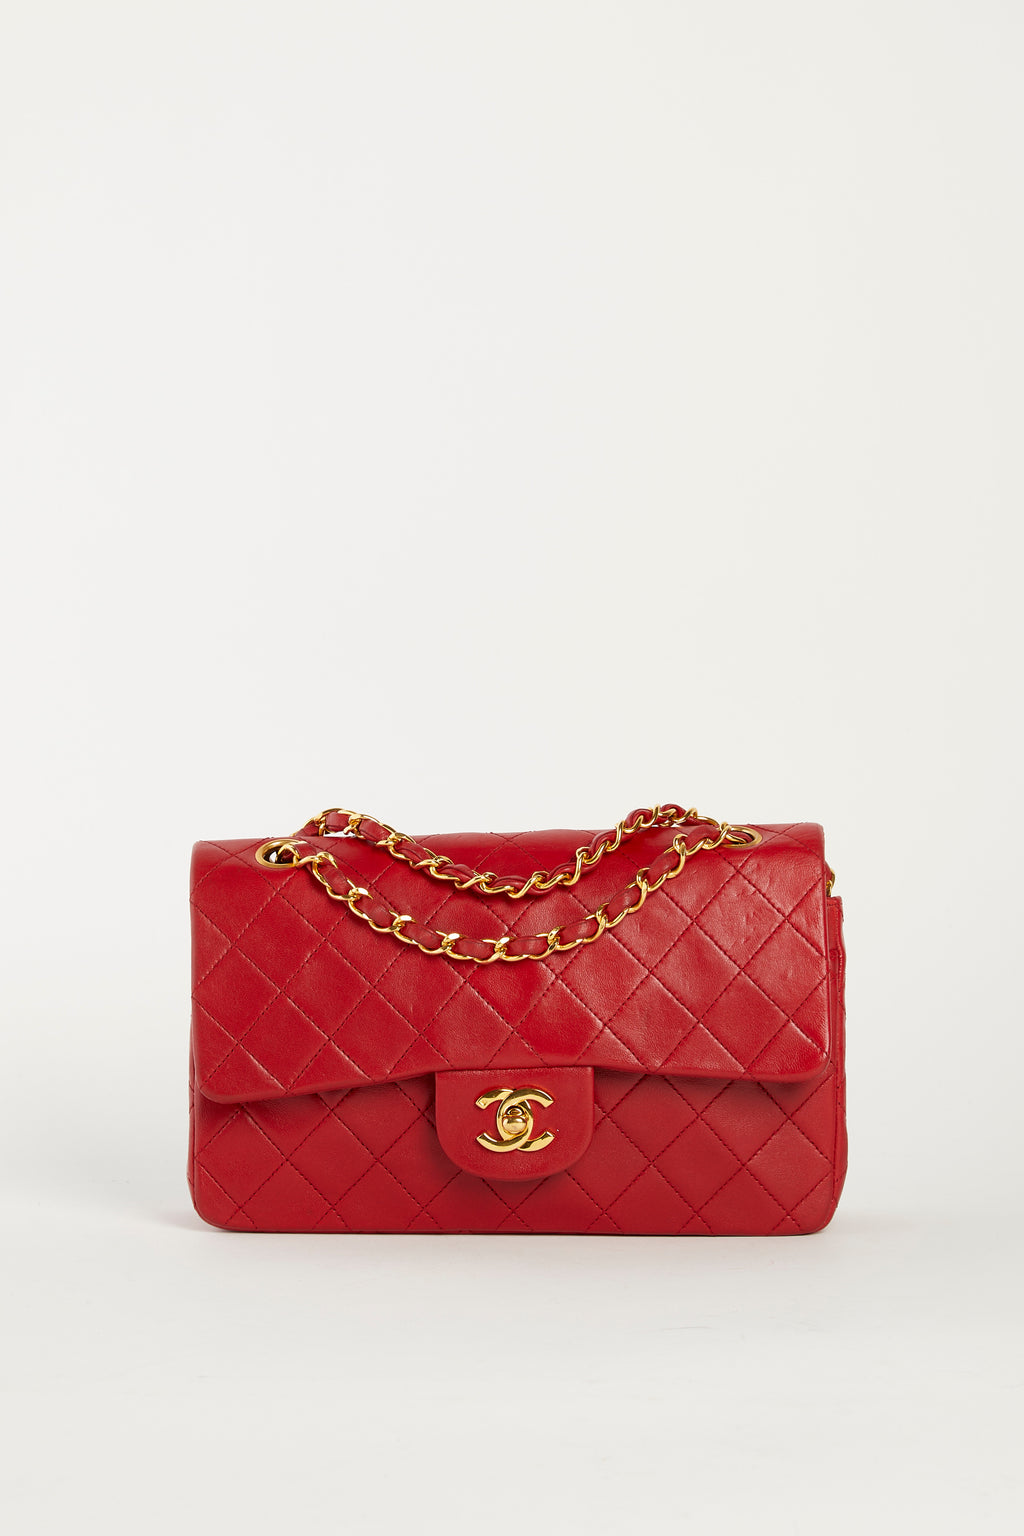 90s Chanel Red Leather Small Double Flap Bag GHW